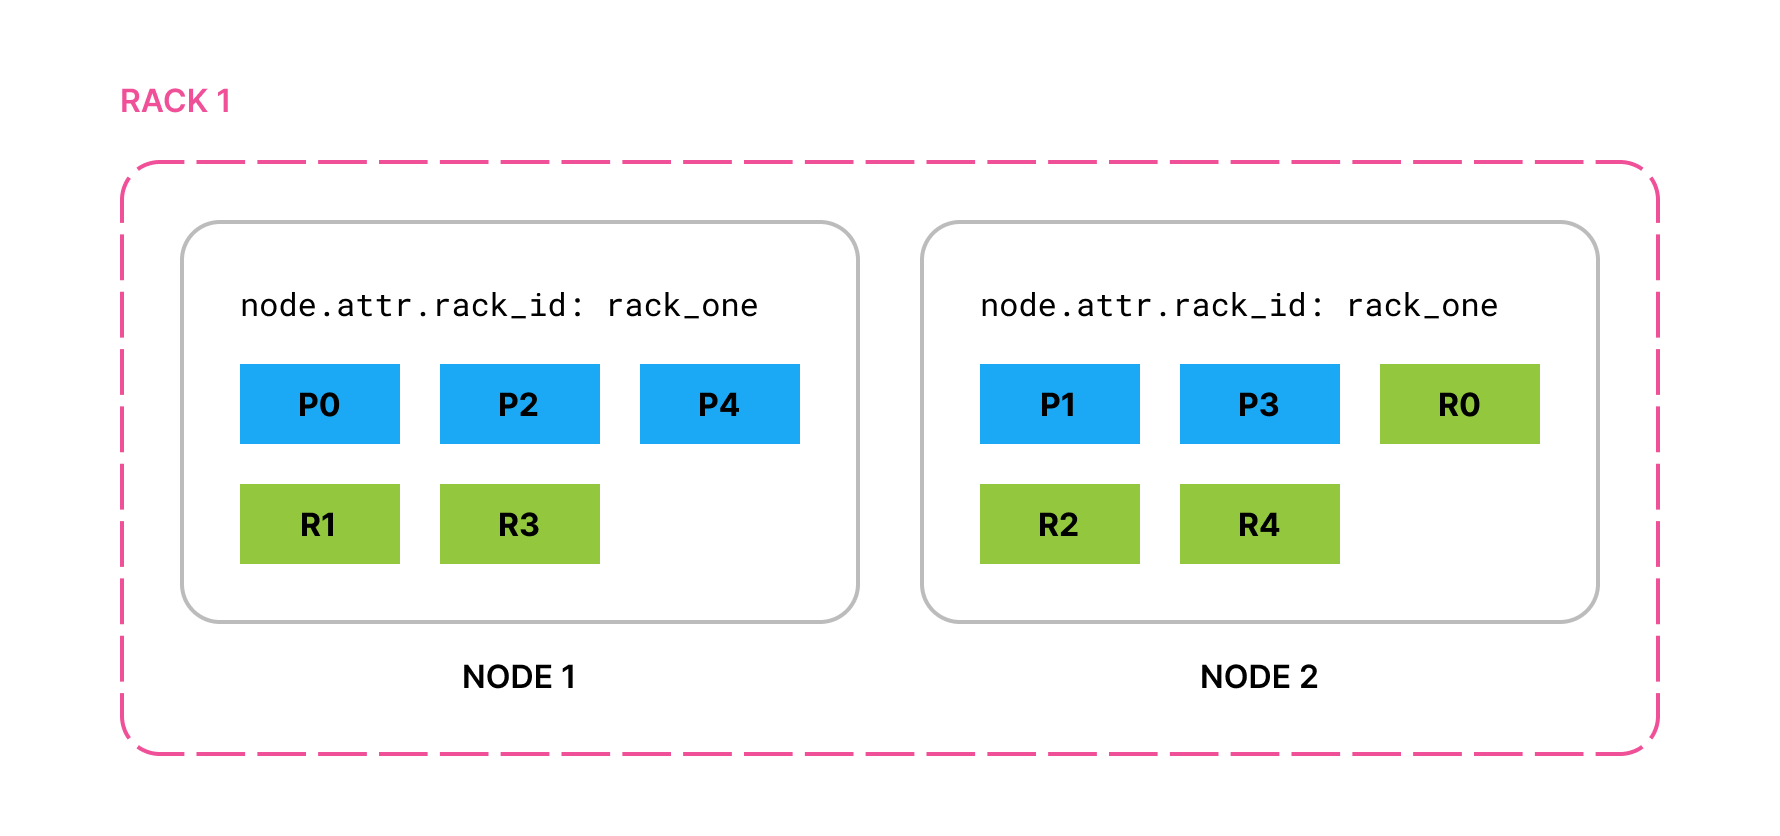 All primaries and replicas are allocated across two nodes in the same rack